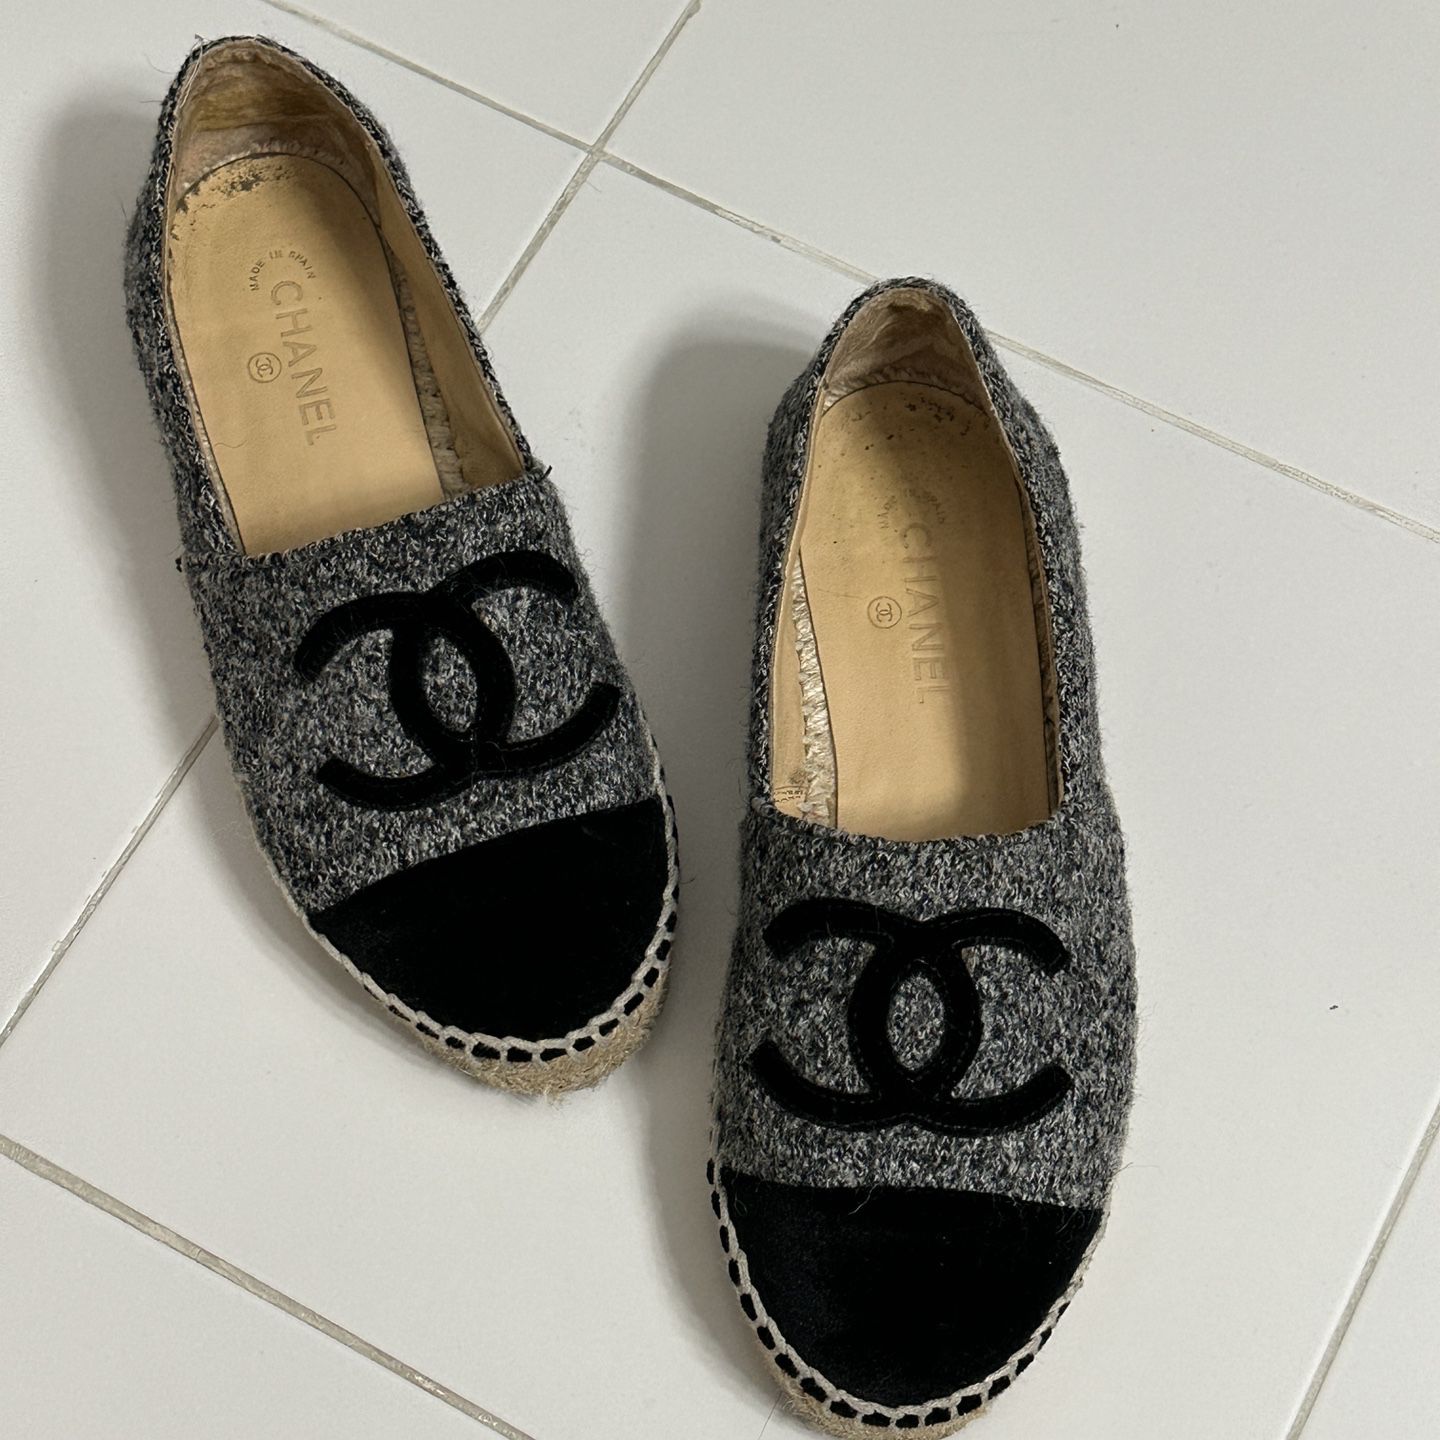 CHANEL Suede Pearl CC Espadrilles 36 Pink 210150